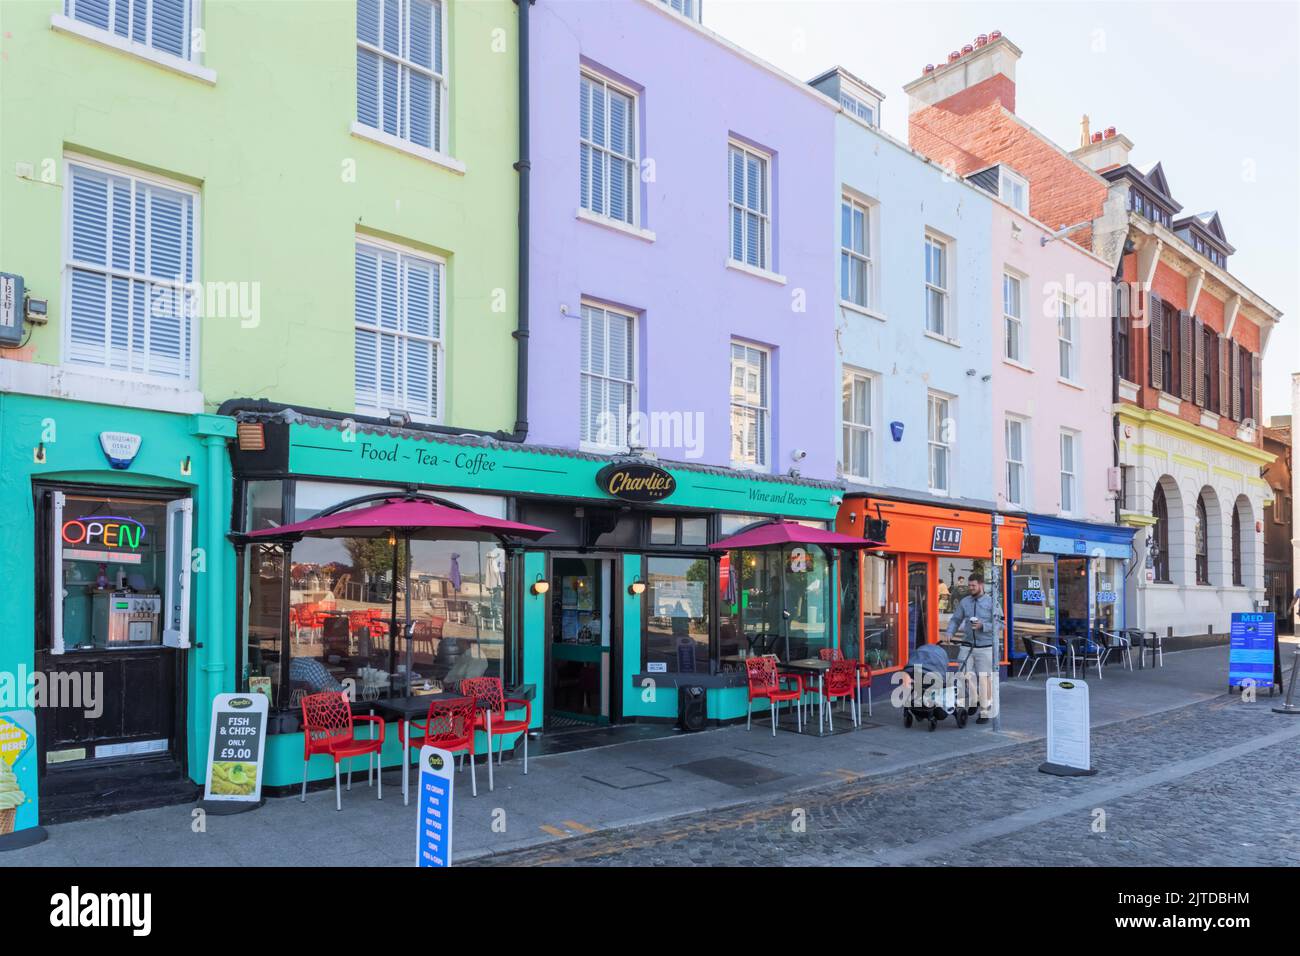 England, Kent, Margate, Old Town Colourful Seafront Cafes and Restaurants Stock Photo